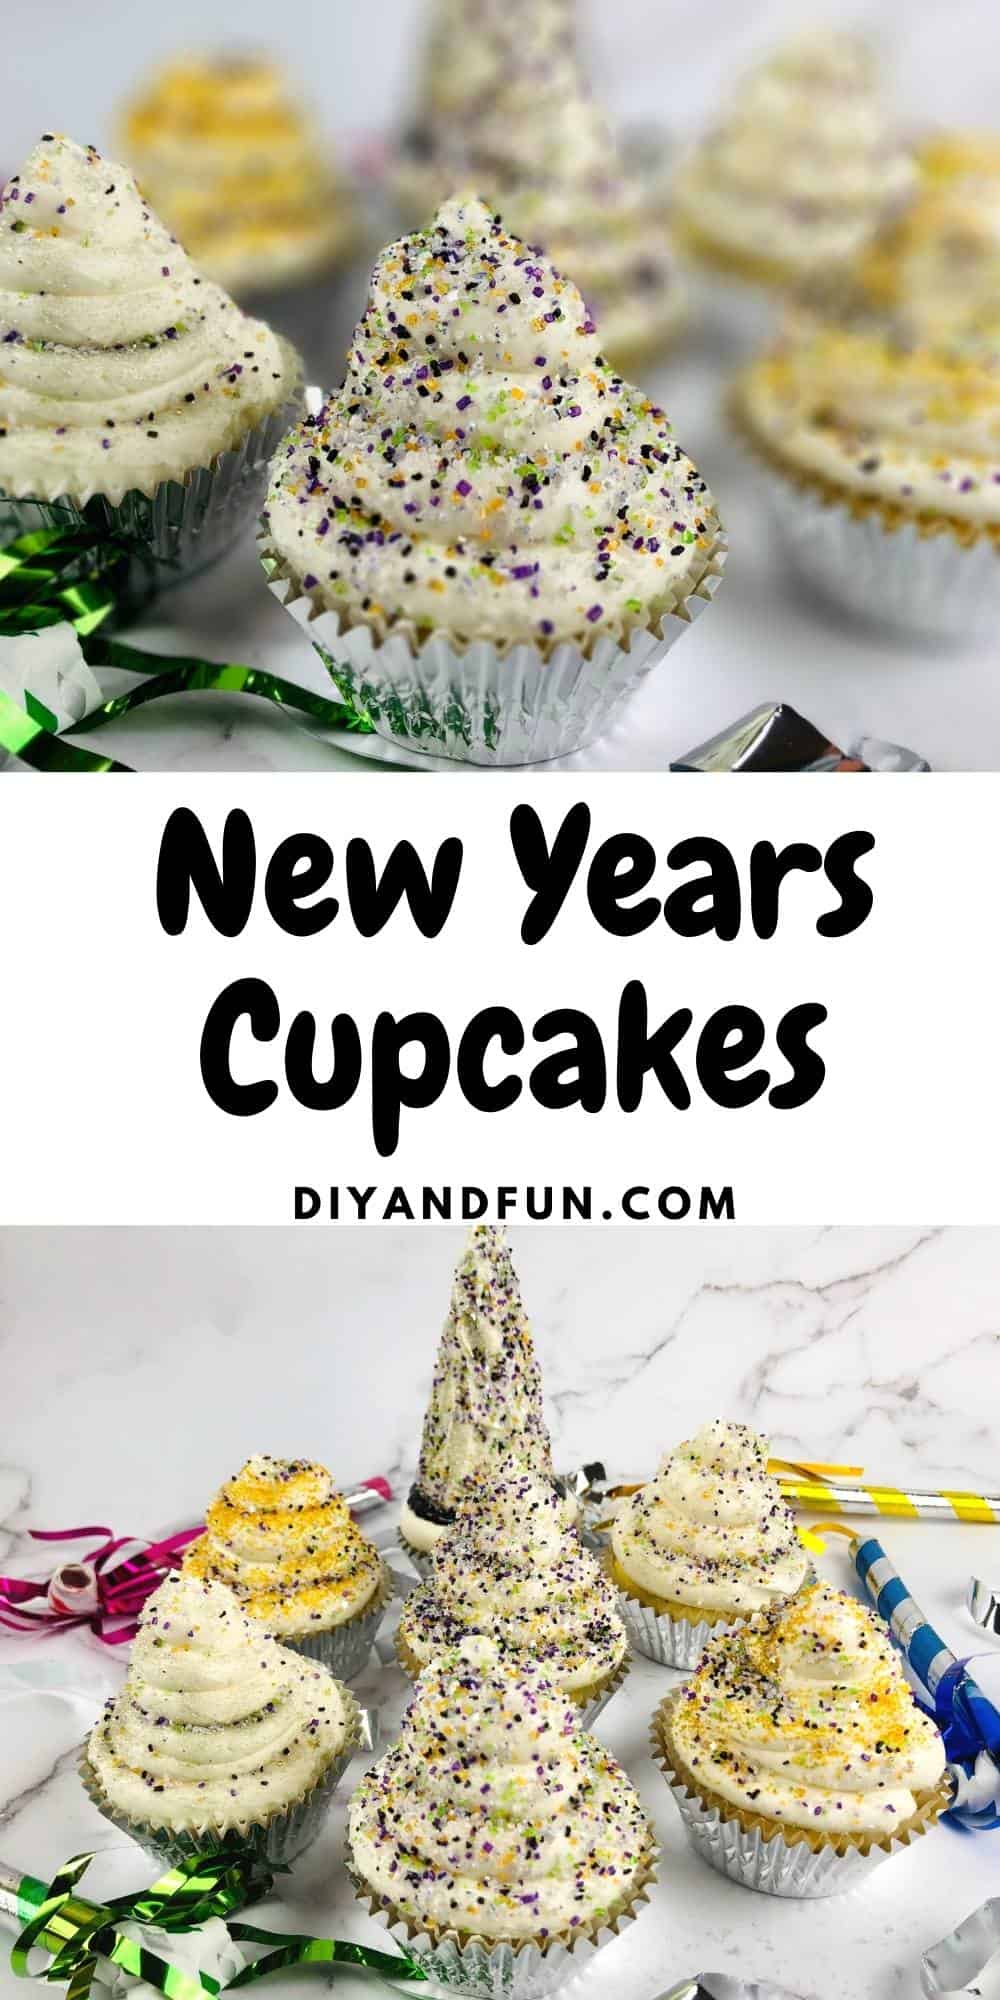 New Years Eve Cupcakes, a tasty and simple cupcake recipe idea made with champagne or sparkling cider alternative.